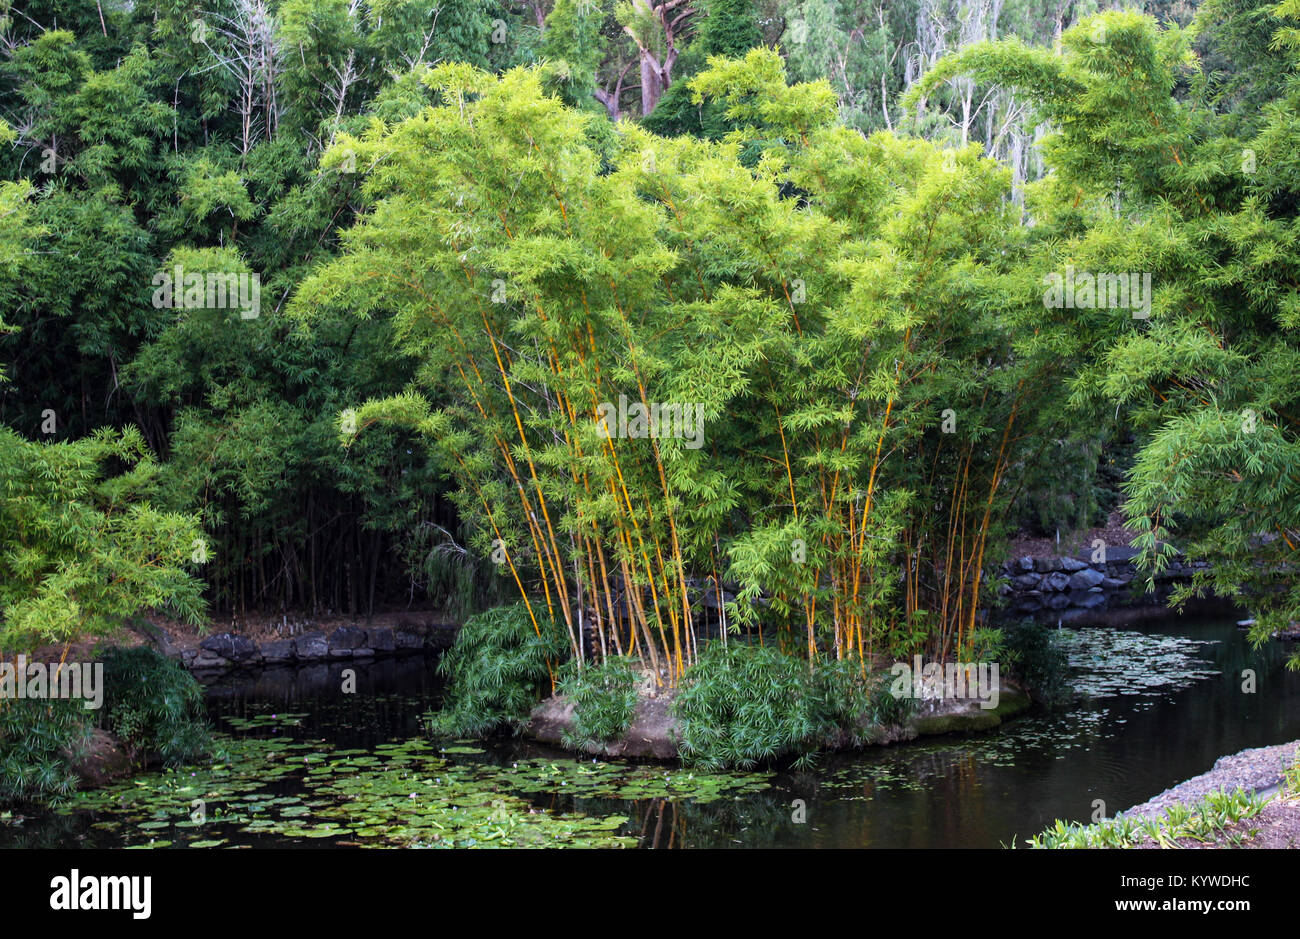 Bamboo island in shallow lake in botanical gardens with lily pads Stock Photo